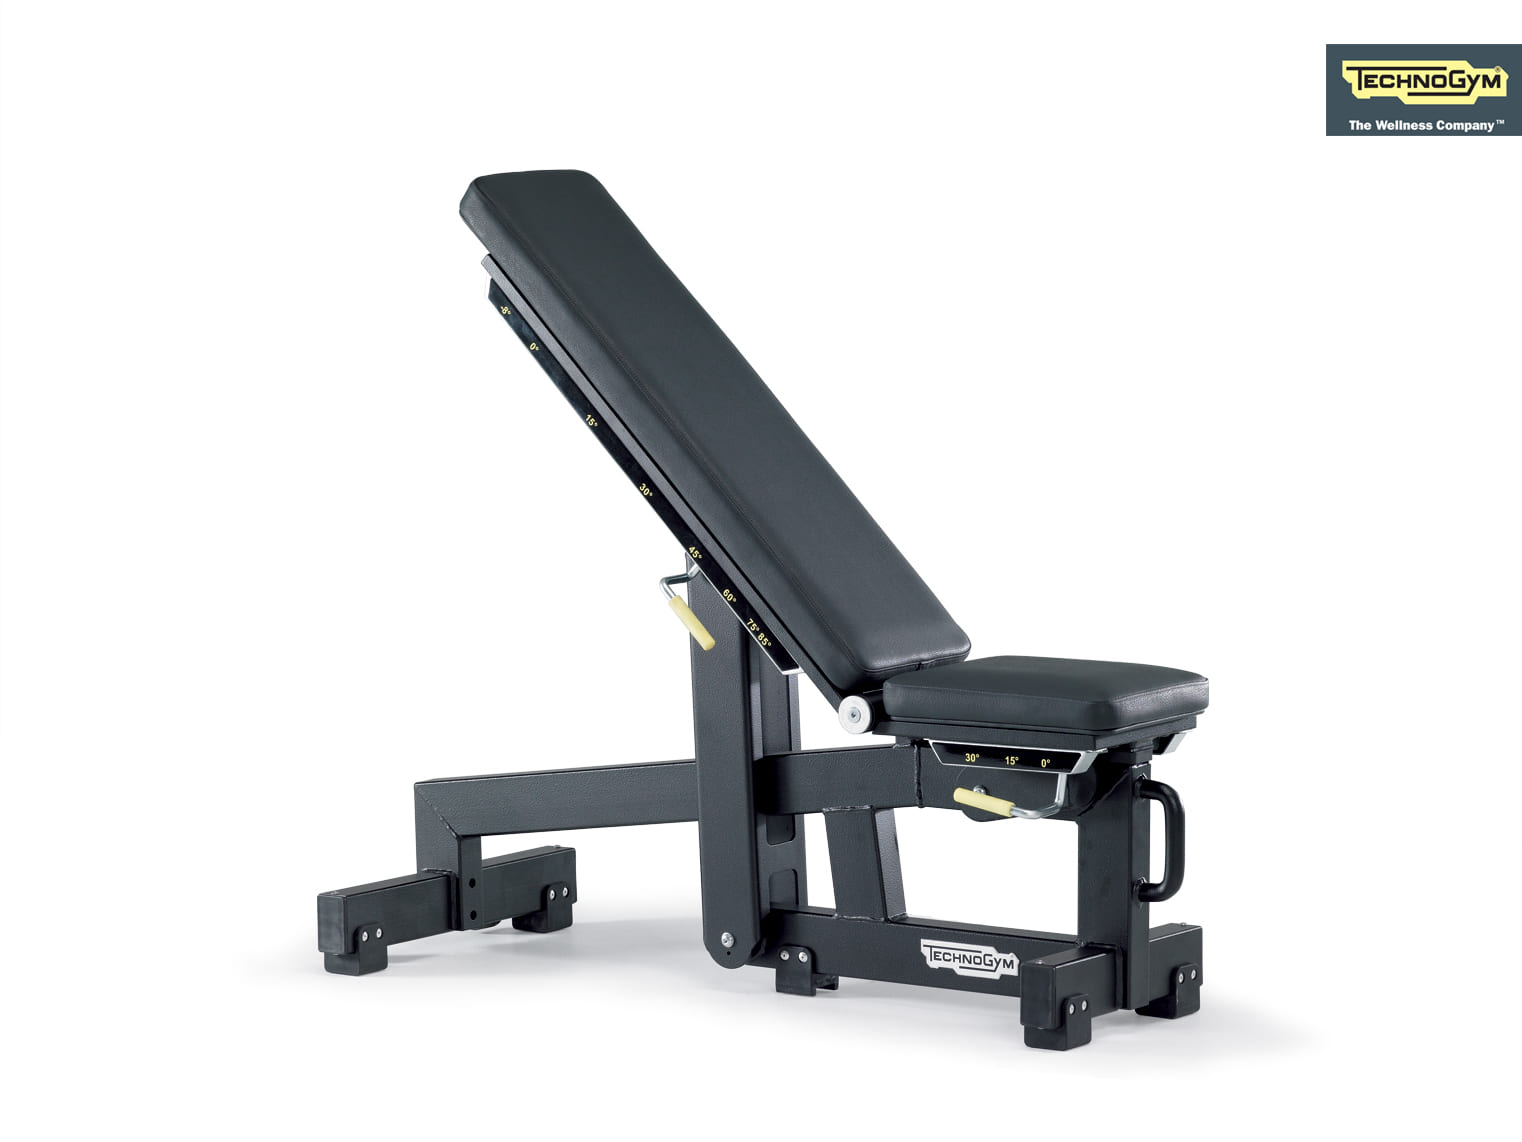 Performance Benches – Adjustable Bench